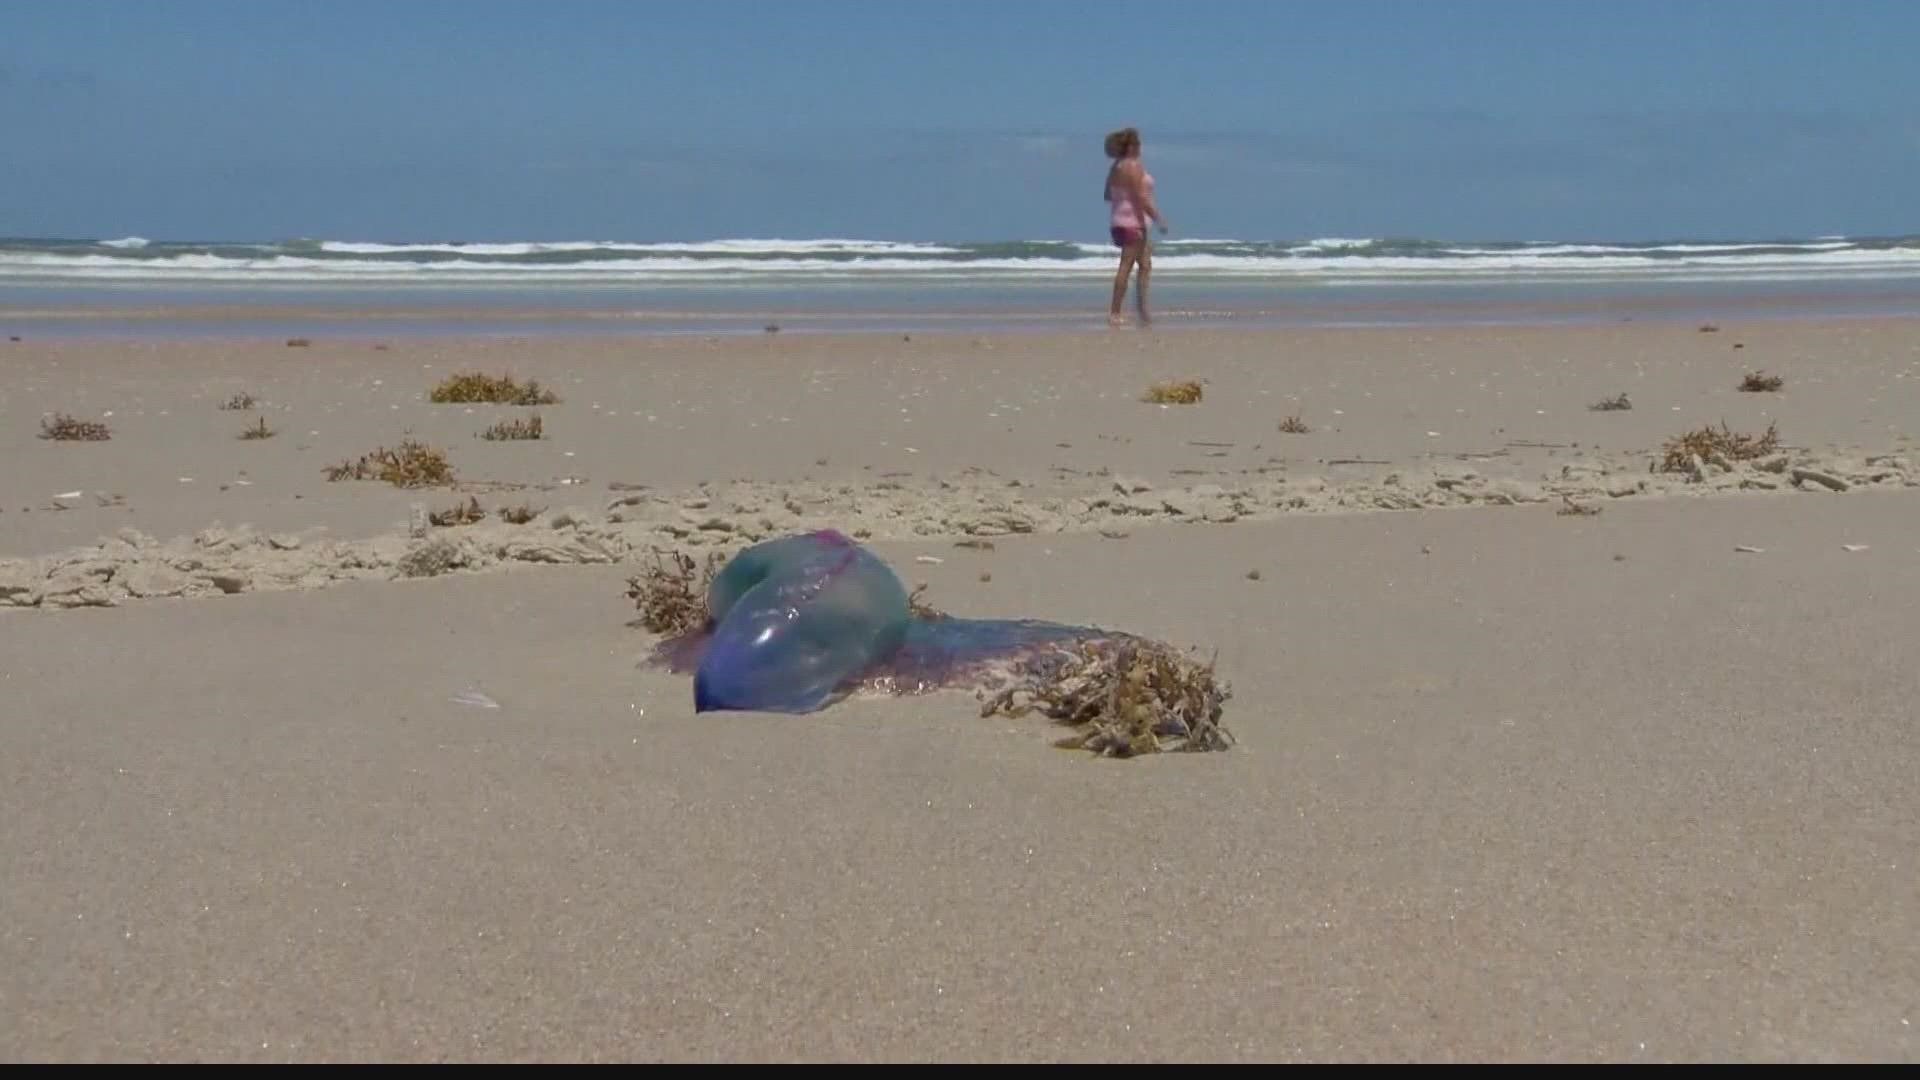 Lifeguards are reminding people to be aware of Portuguese man o’ war.